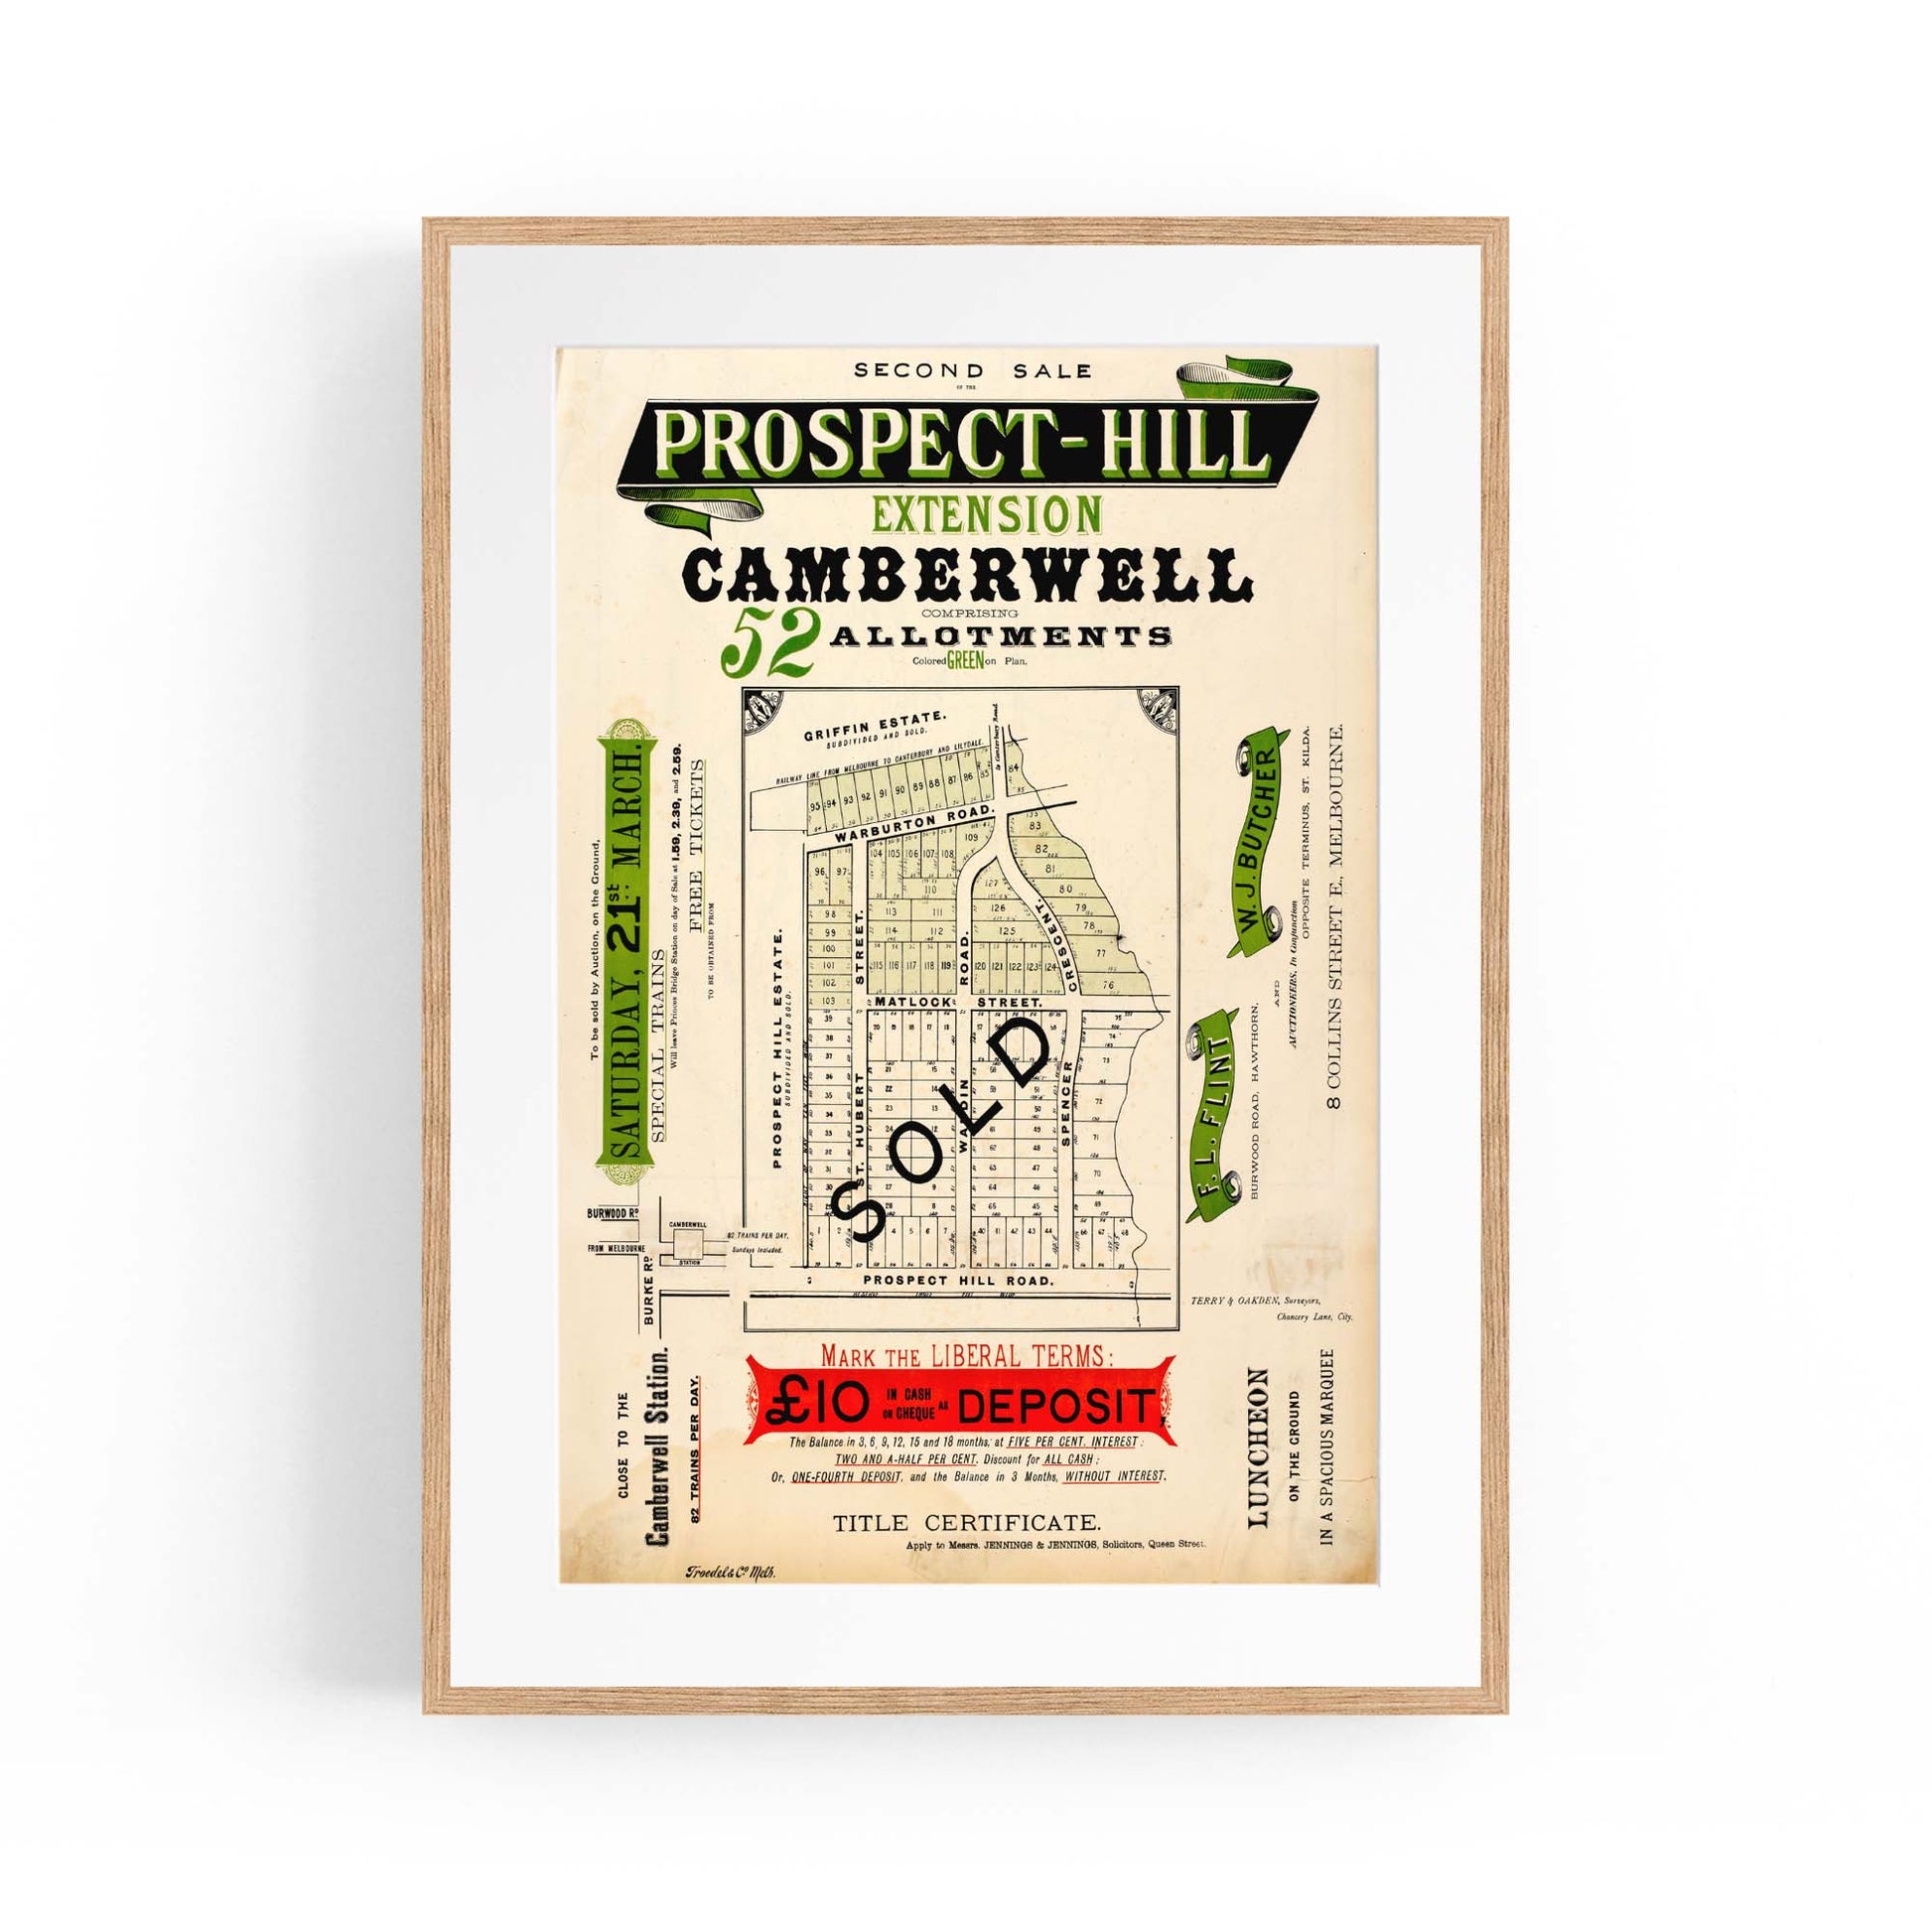 Camberwell Melbourne Vintage Real Estate Ad Art #2 - The Affordable Art Company